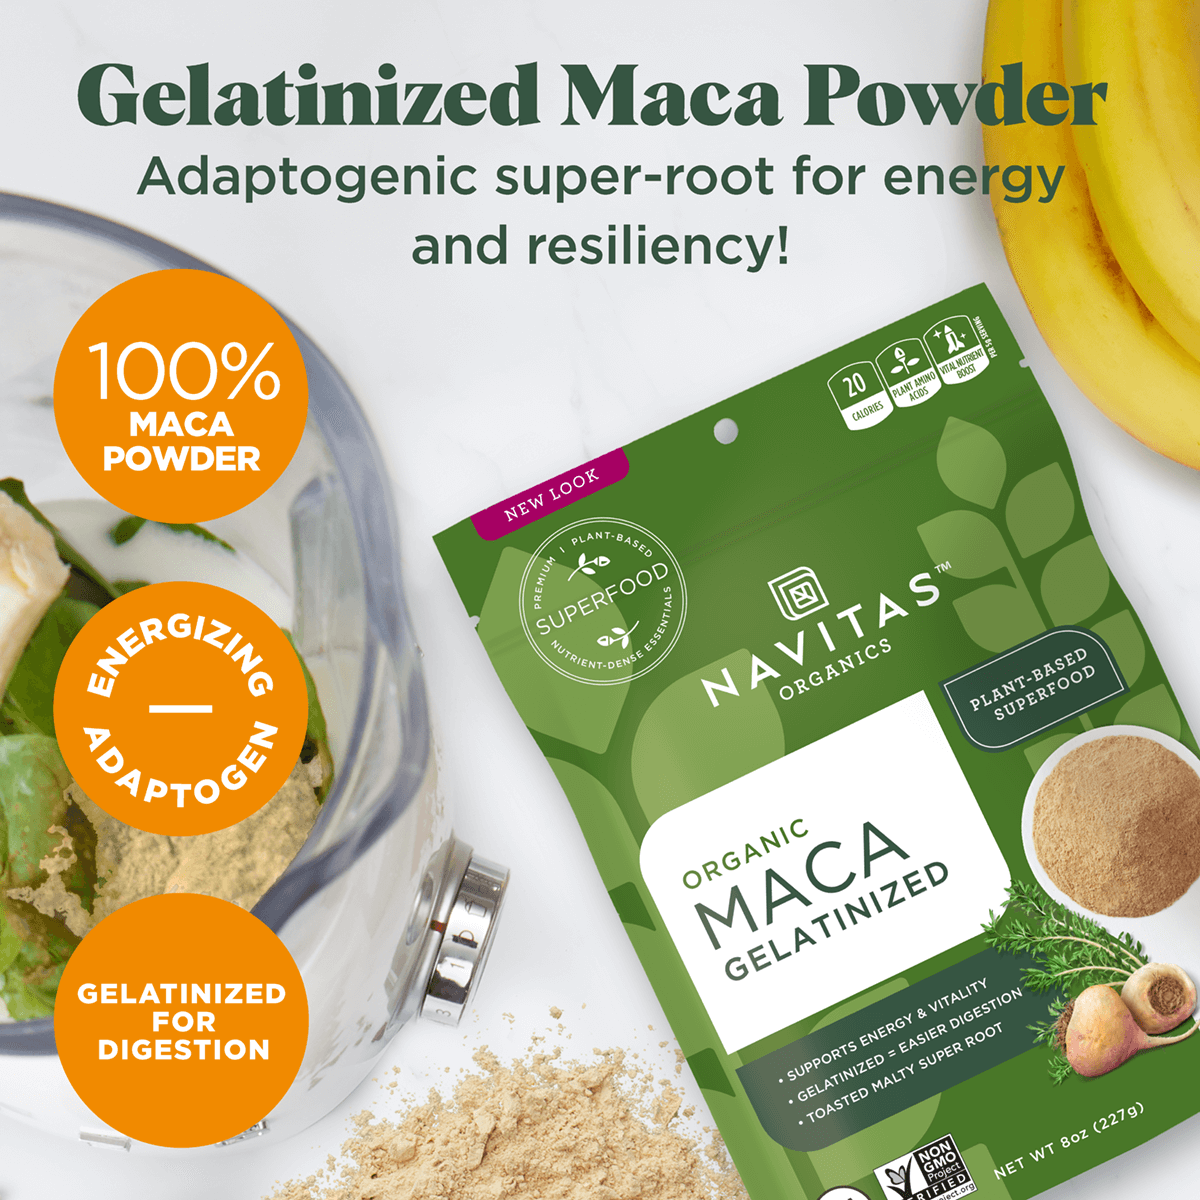 Gelatinized Maca Powder. Adaptogenic super-root for energy and resiliency! 100% Maca Powder. Energizing adaptogen. Gelatinized for digestion.